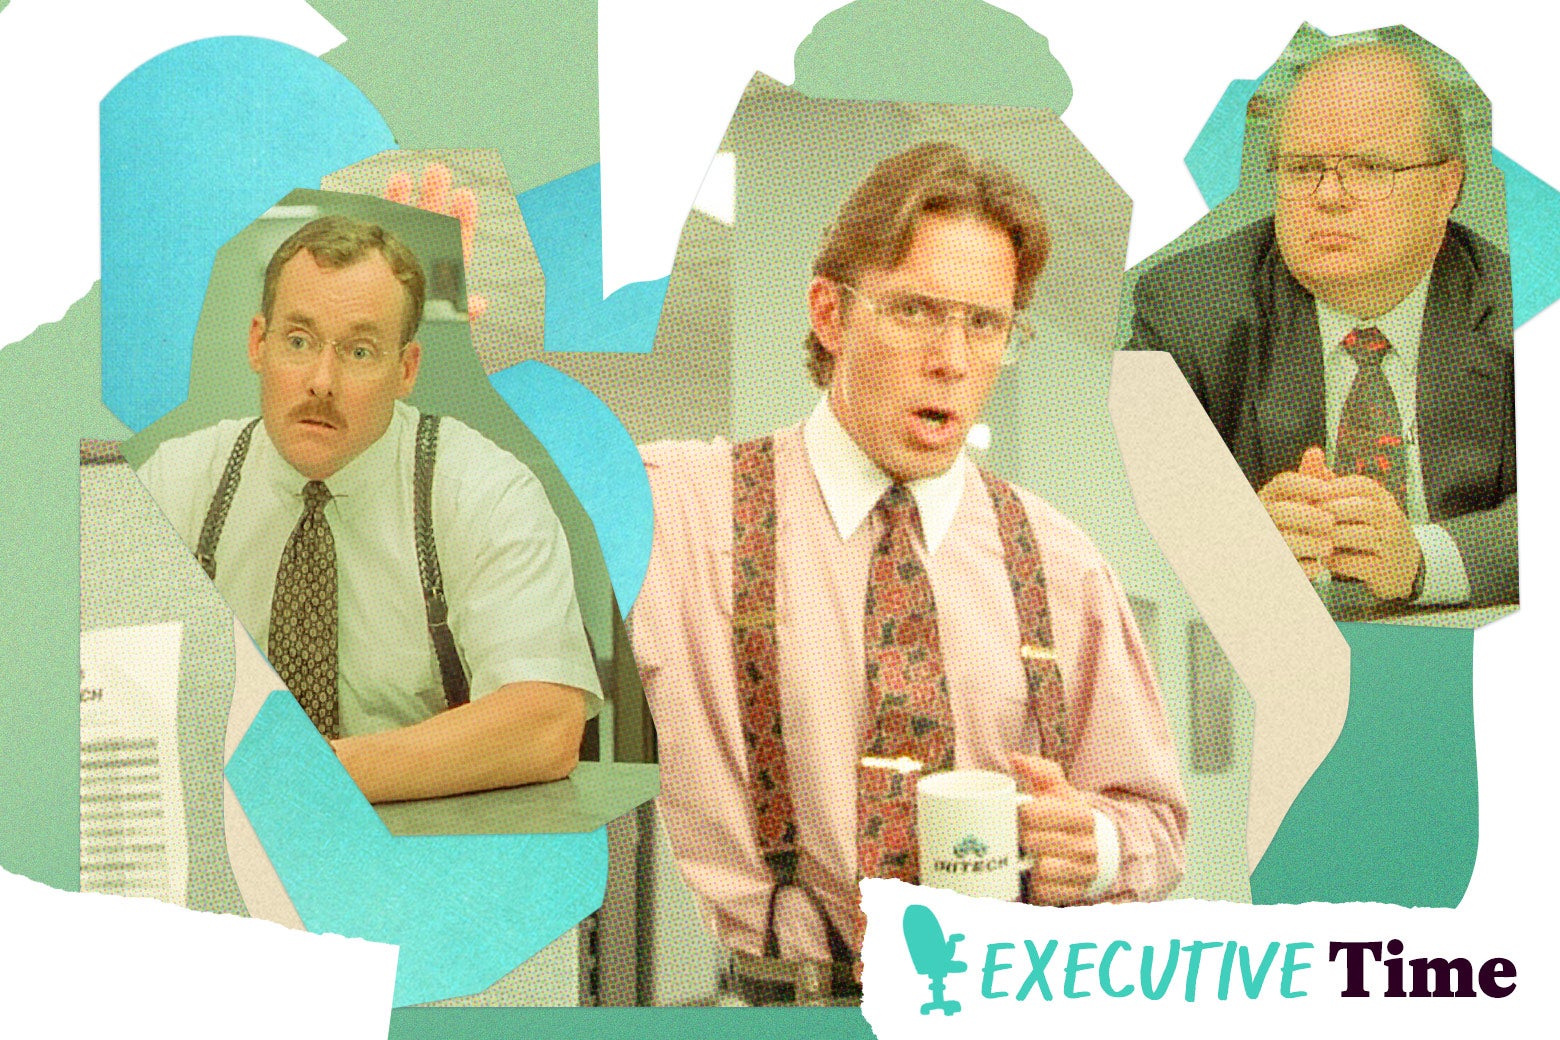 Office Space's Bill Lumbergh evaluated by a management consultant.